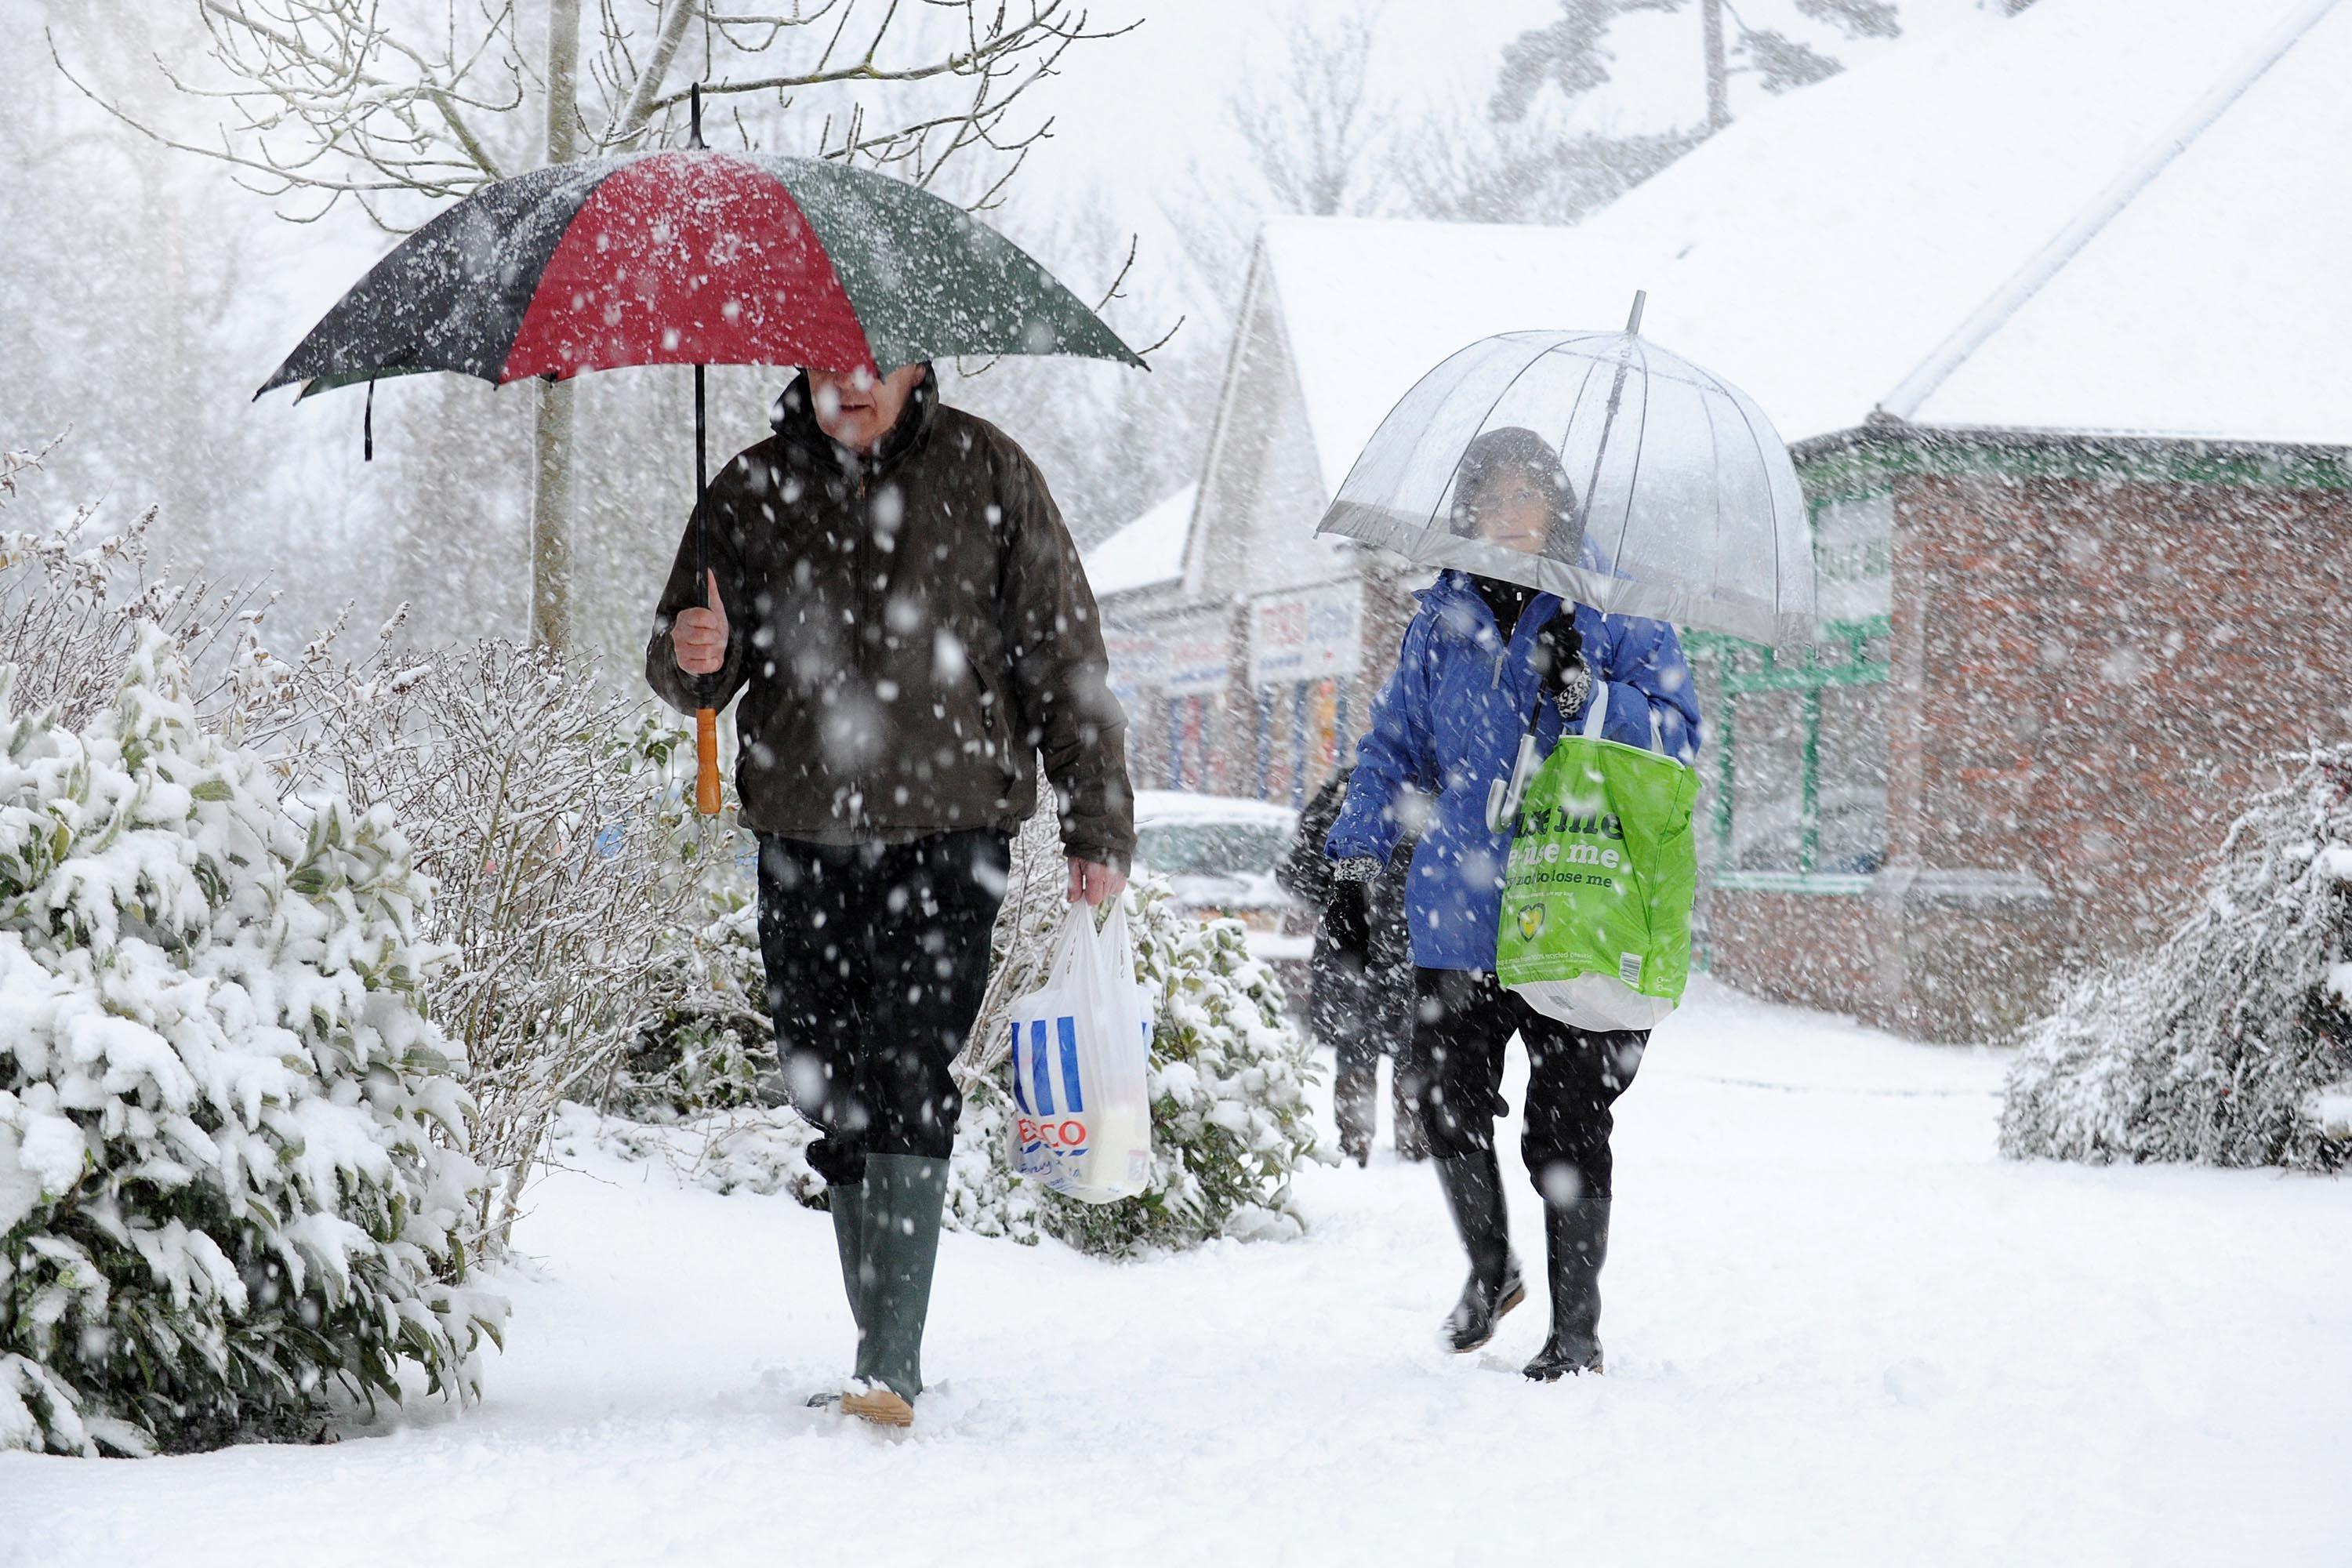 Braving the blizzard near Tesco Express in Burgess Hill in December 2010